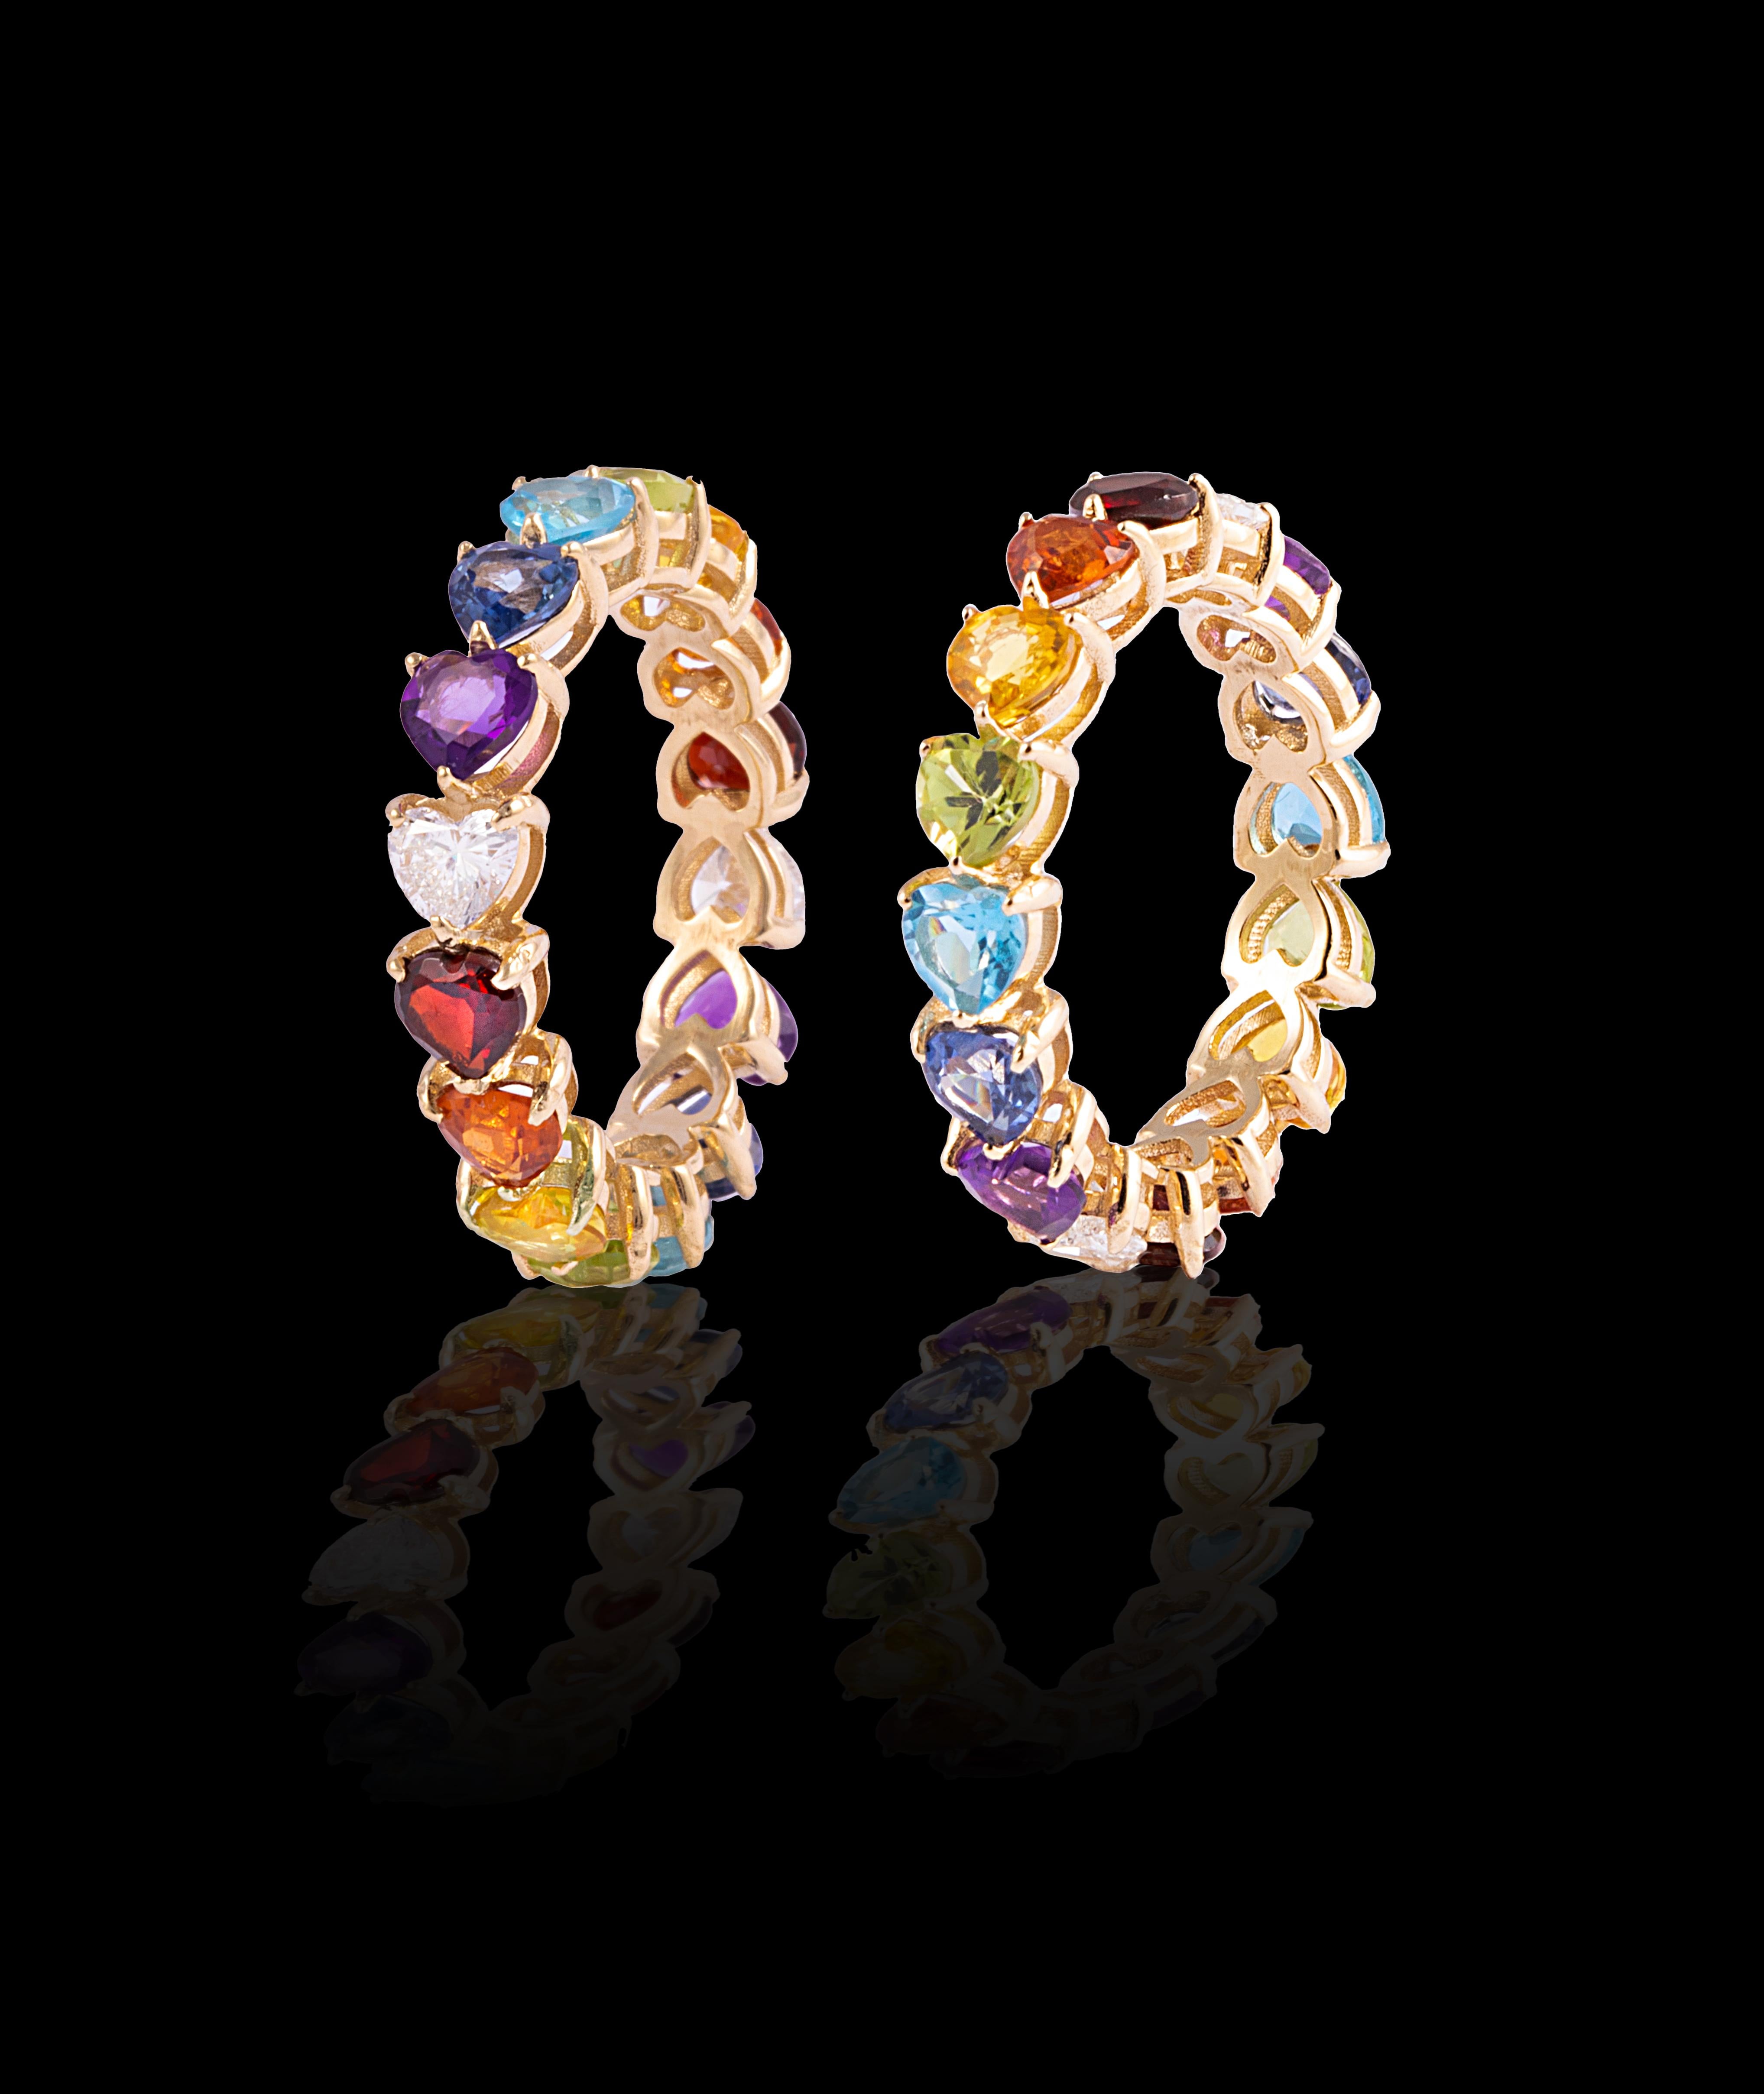 As the first fine diamond jewelry piece from the house of Mordekai, we are celebrating one of our iconic themes, the Rainbow! This unique ring is made of 14k gold, and hand-set with the finest hand-selected, colored stones and gems sourced from all